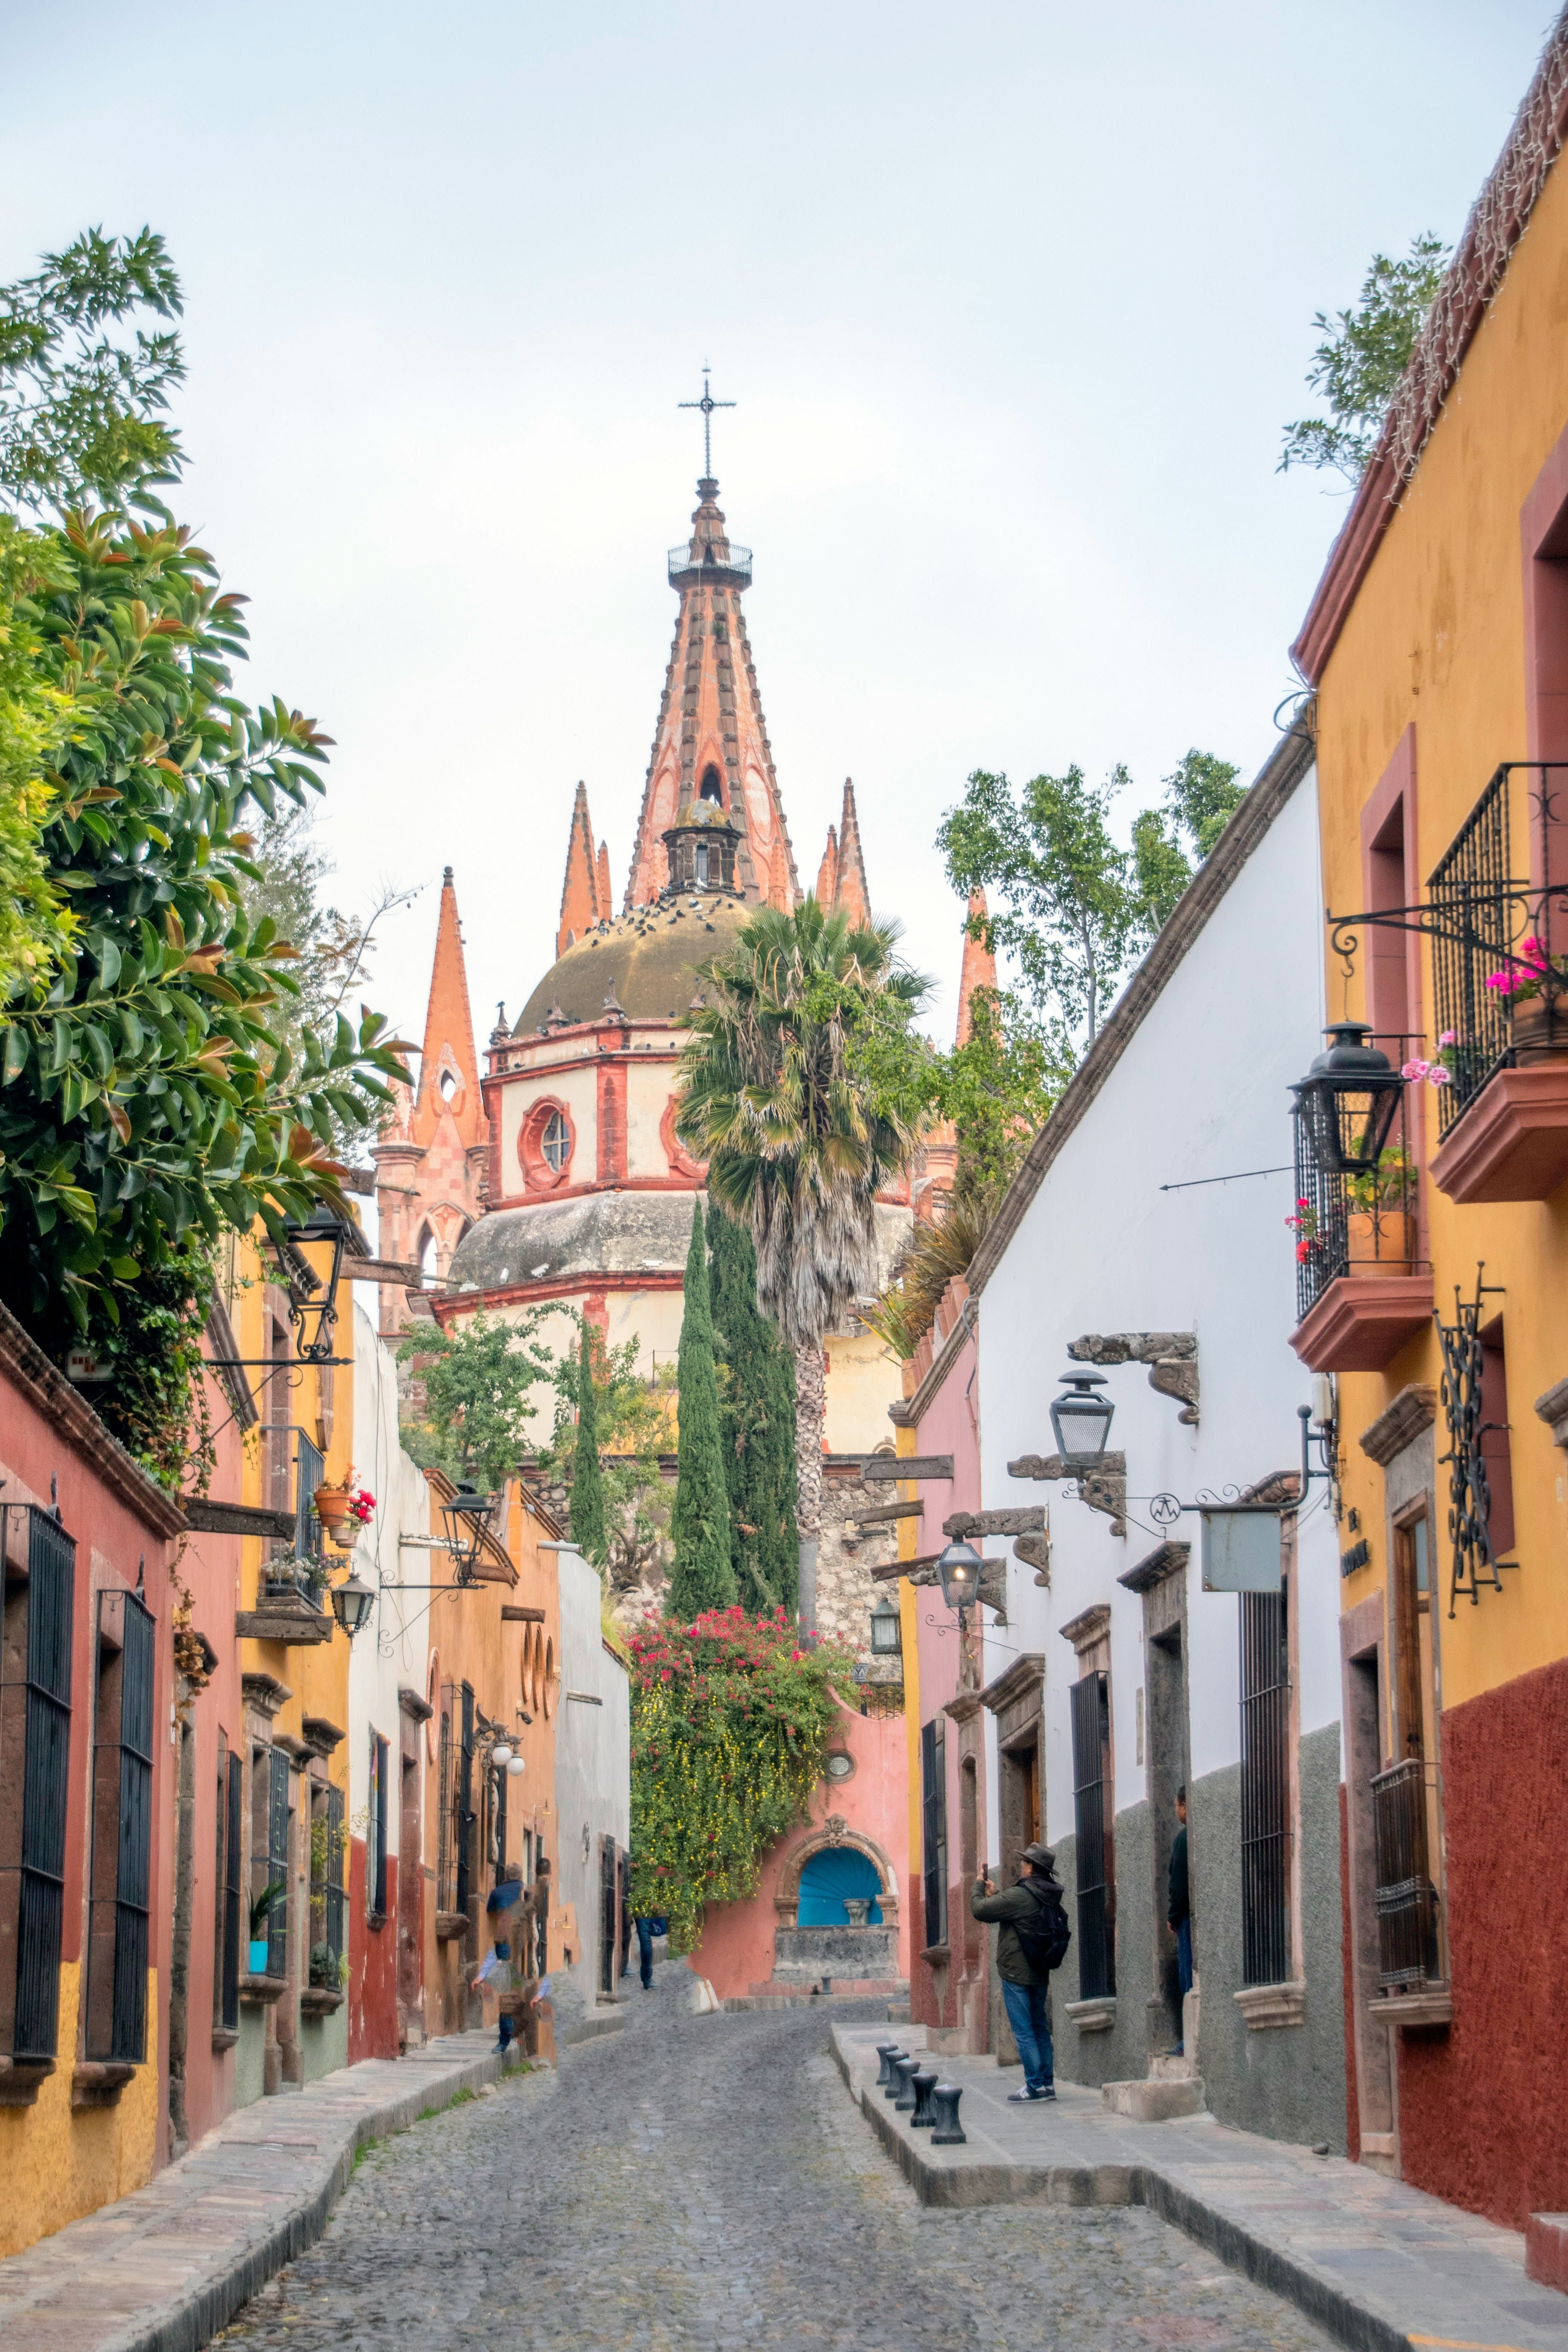 San Miguel de Allende is a beautiful and historic town with incredible architecture